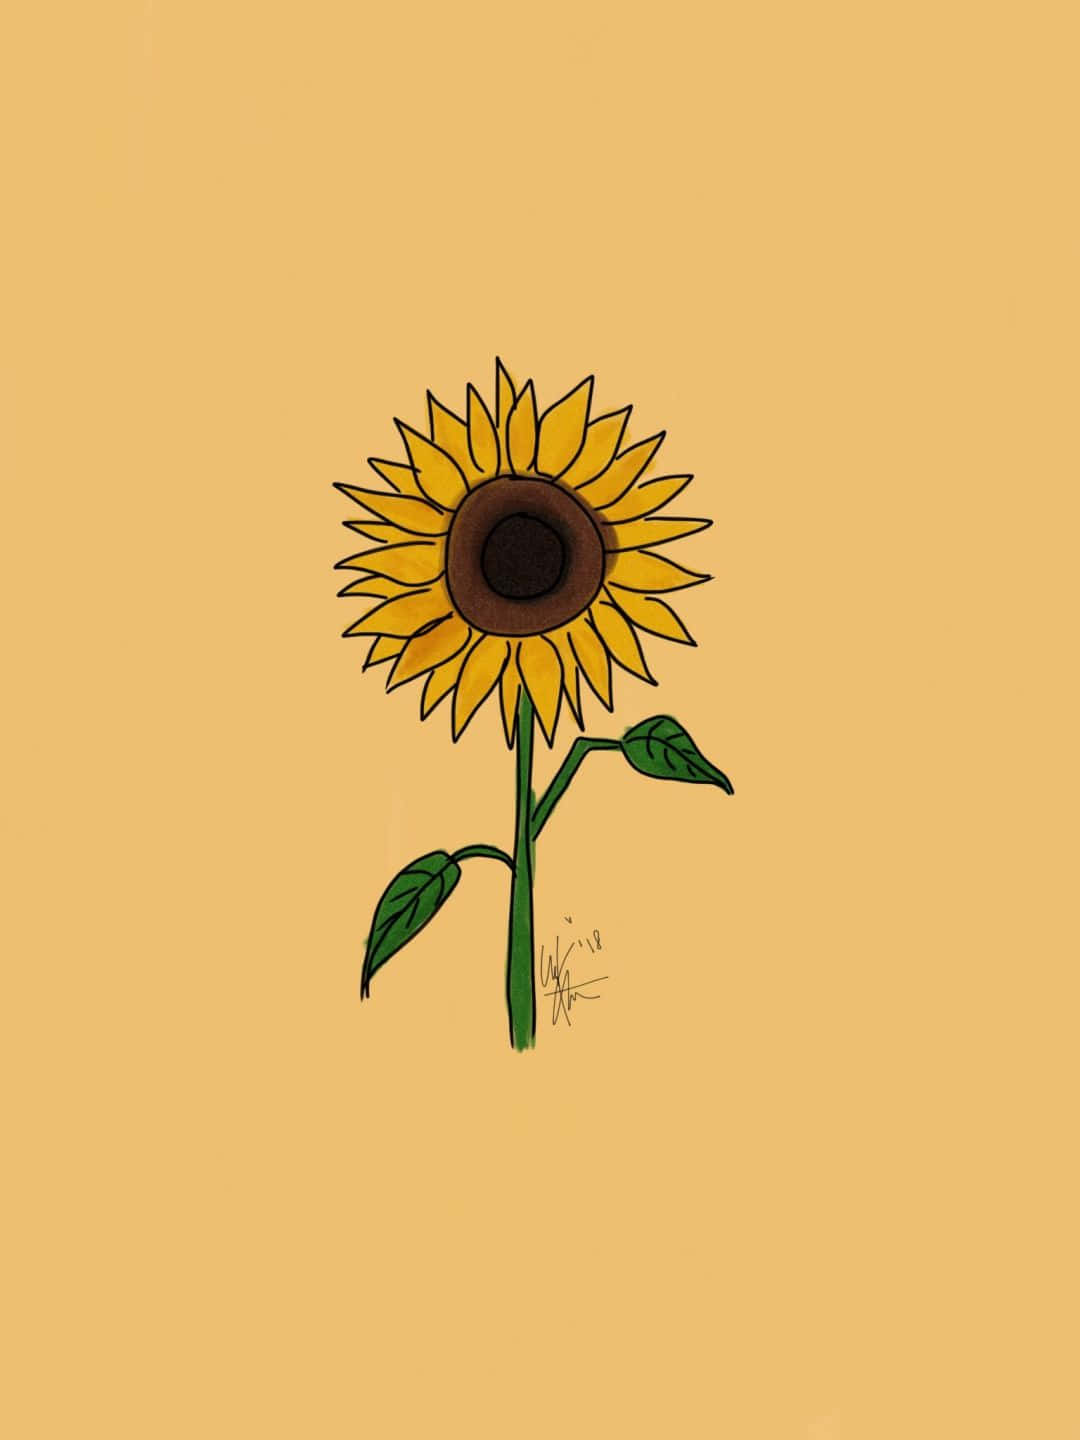 "Let the beauty of the sunflower shine through"